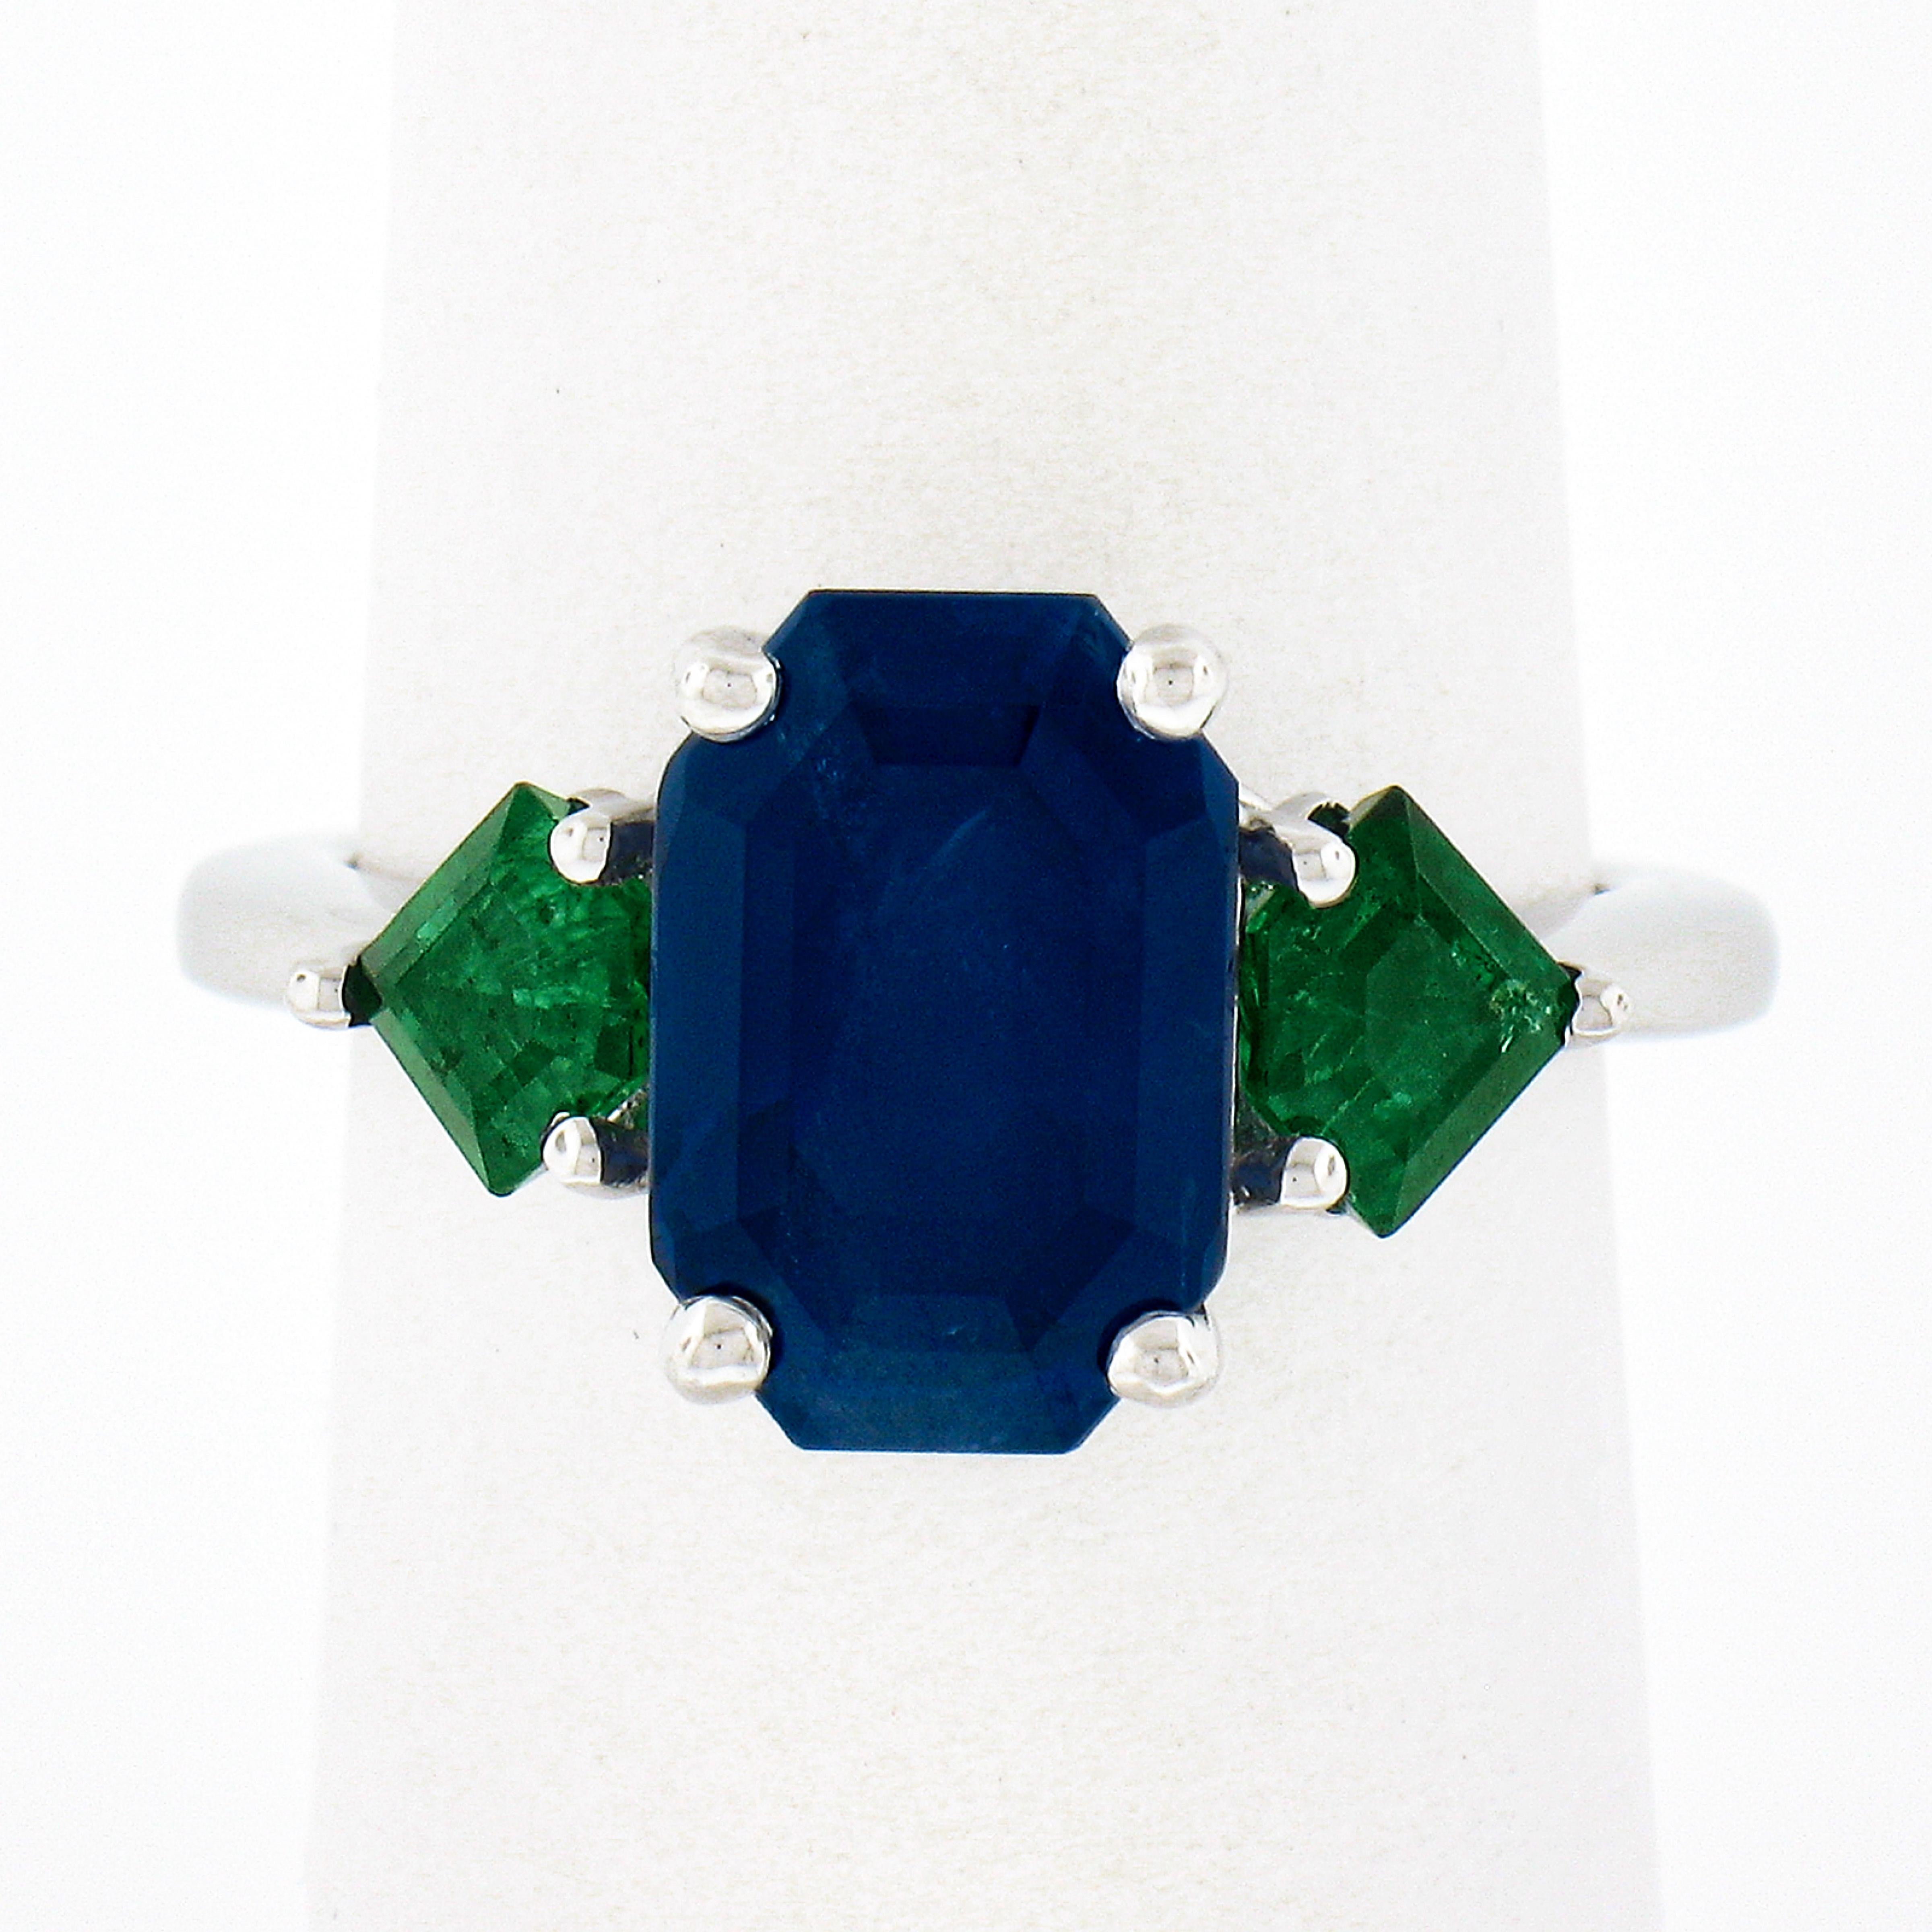 This breathtaking, custom made, sapphire and emerald engagement ring is crafted in solid platinum and features a magnificent, Gubelin certified, elongated emerald cut sapphire solitaire that's perfectly prong set at the center and flanked on either